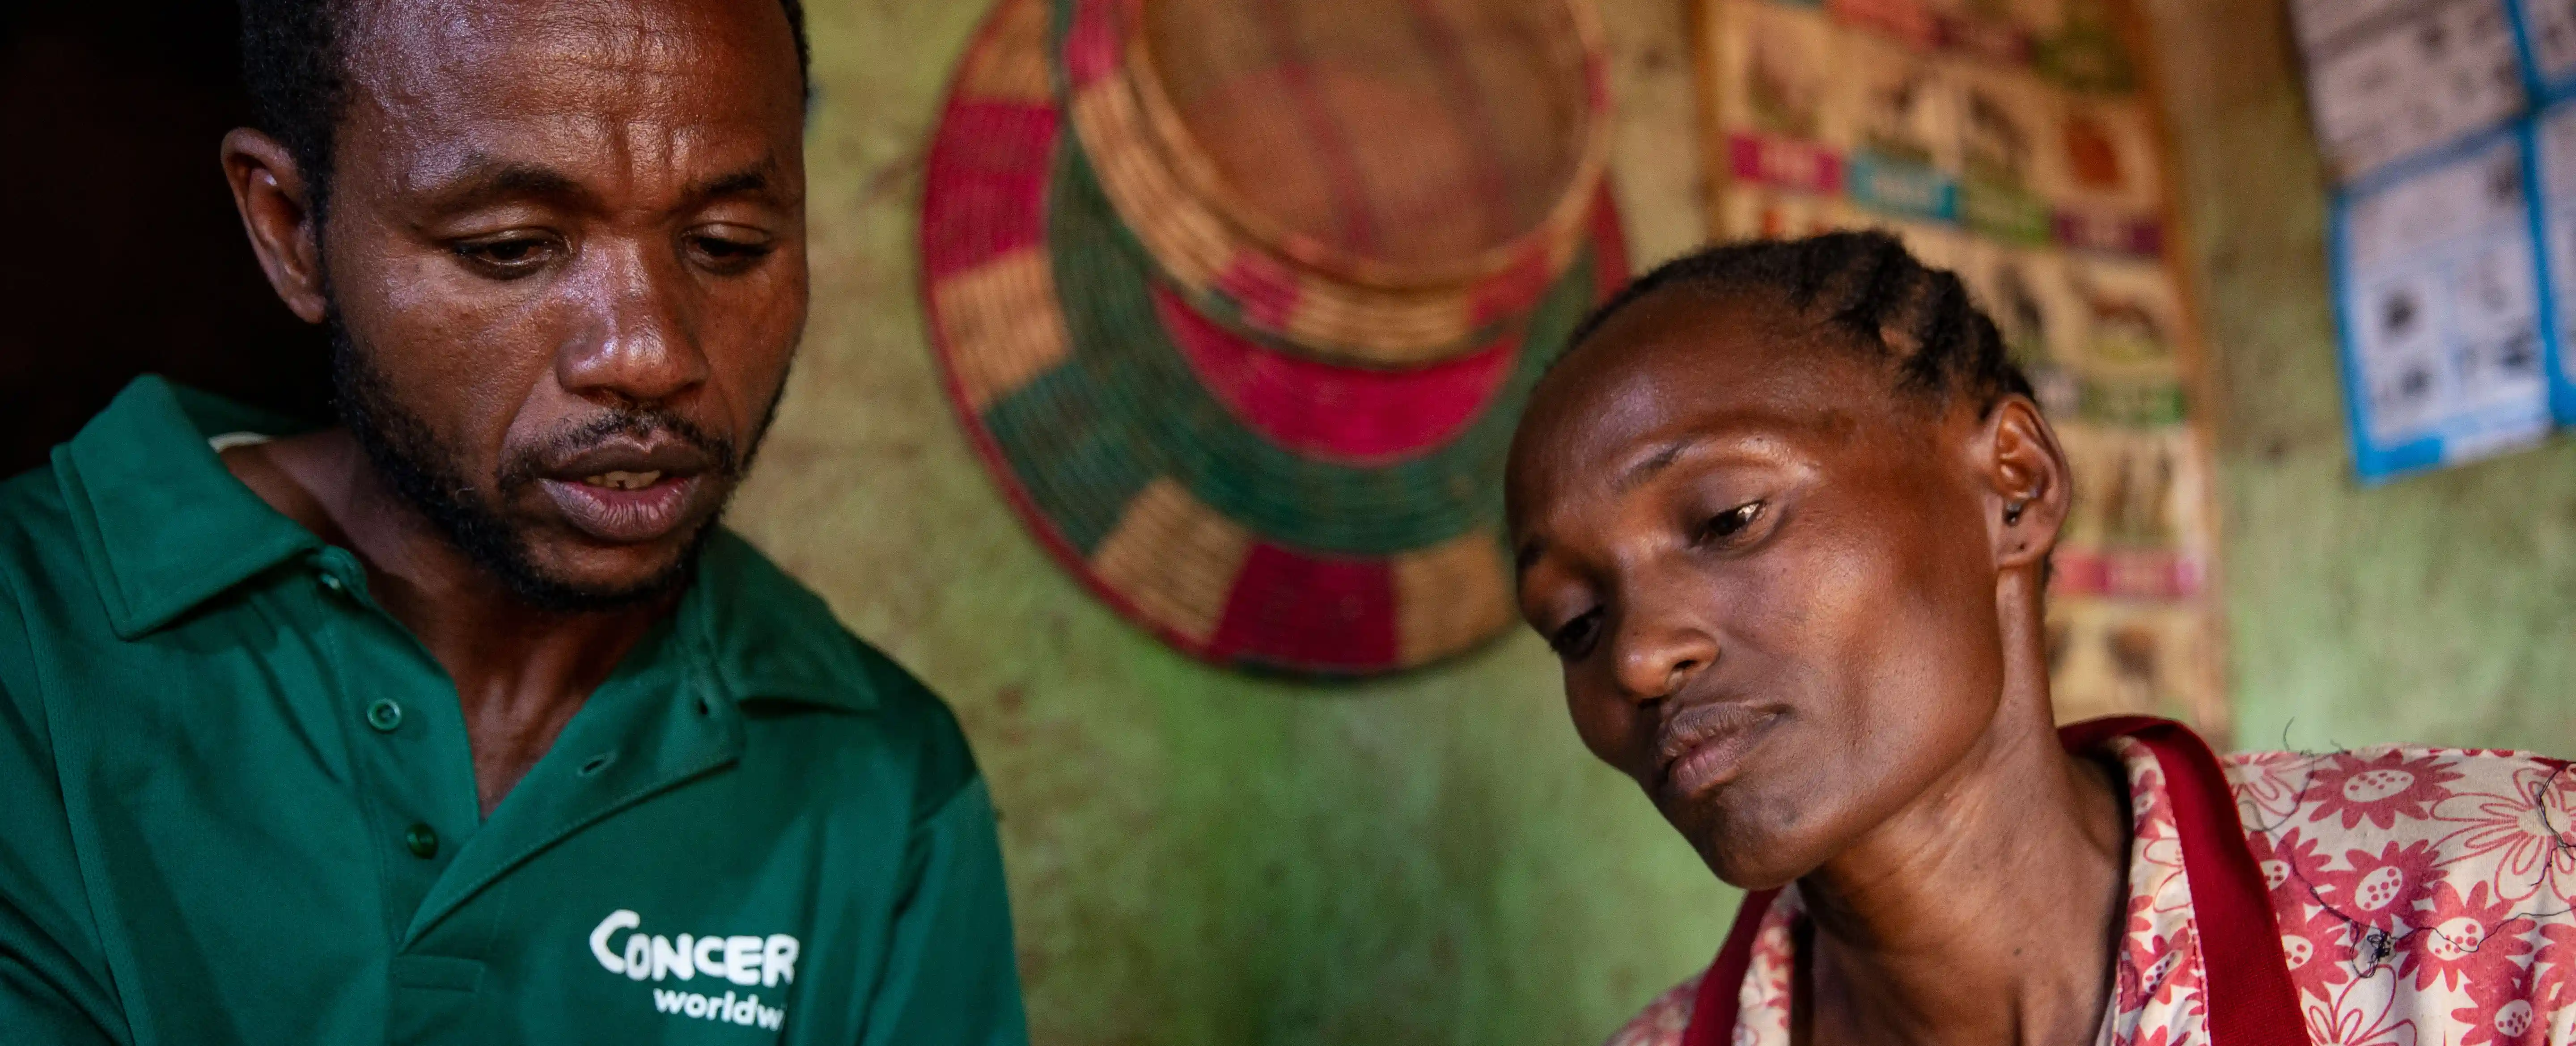 Tarkuwa Debsa, with Concern community coordinator Abate Eyaso at her home in SNNPR, Ethiopia.